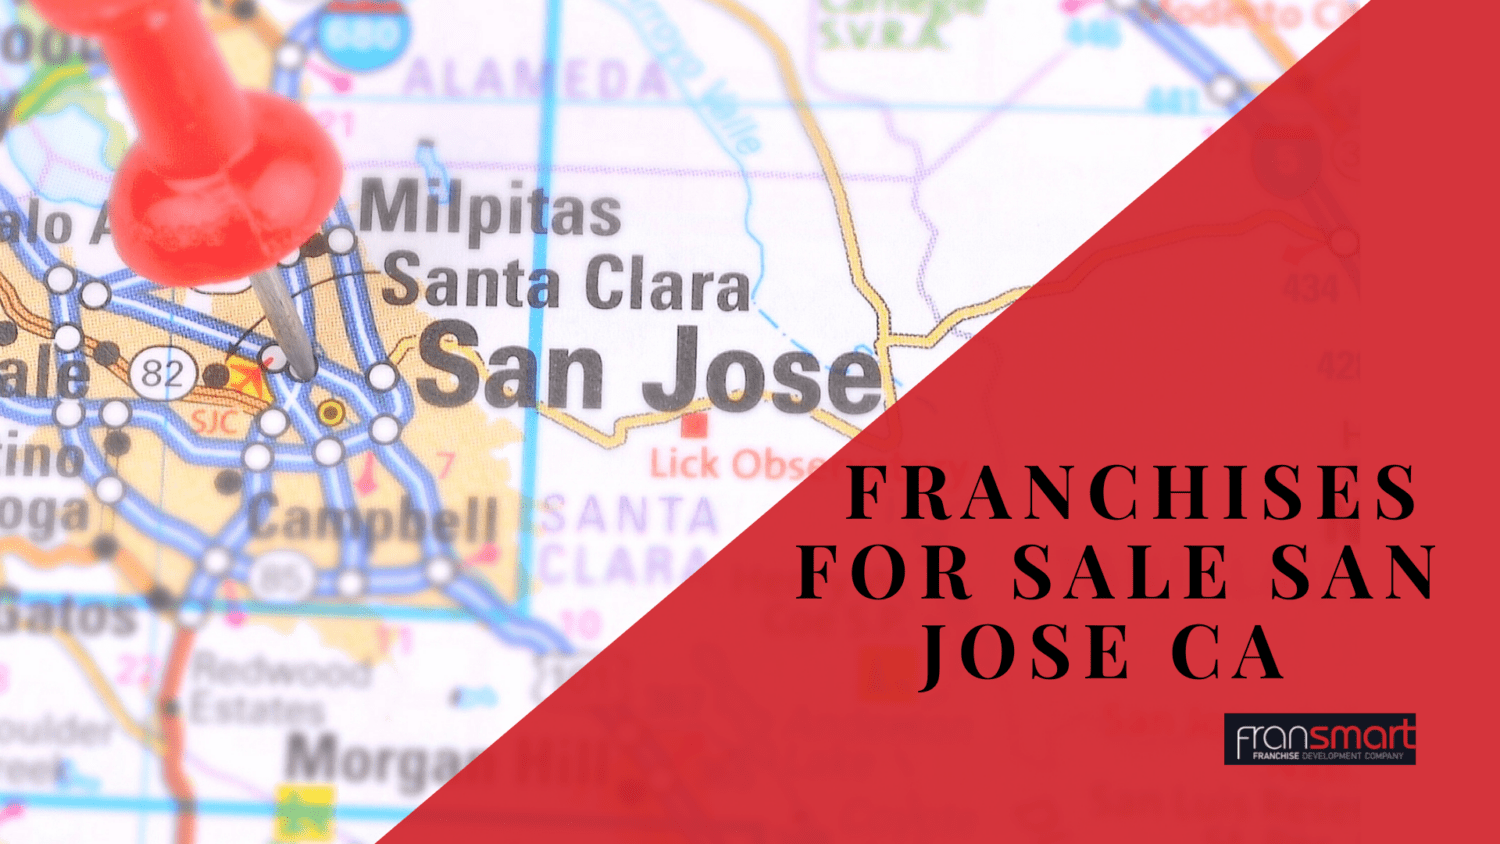 Franchise Opportunities in San Jose California